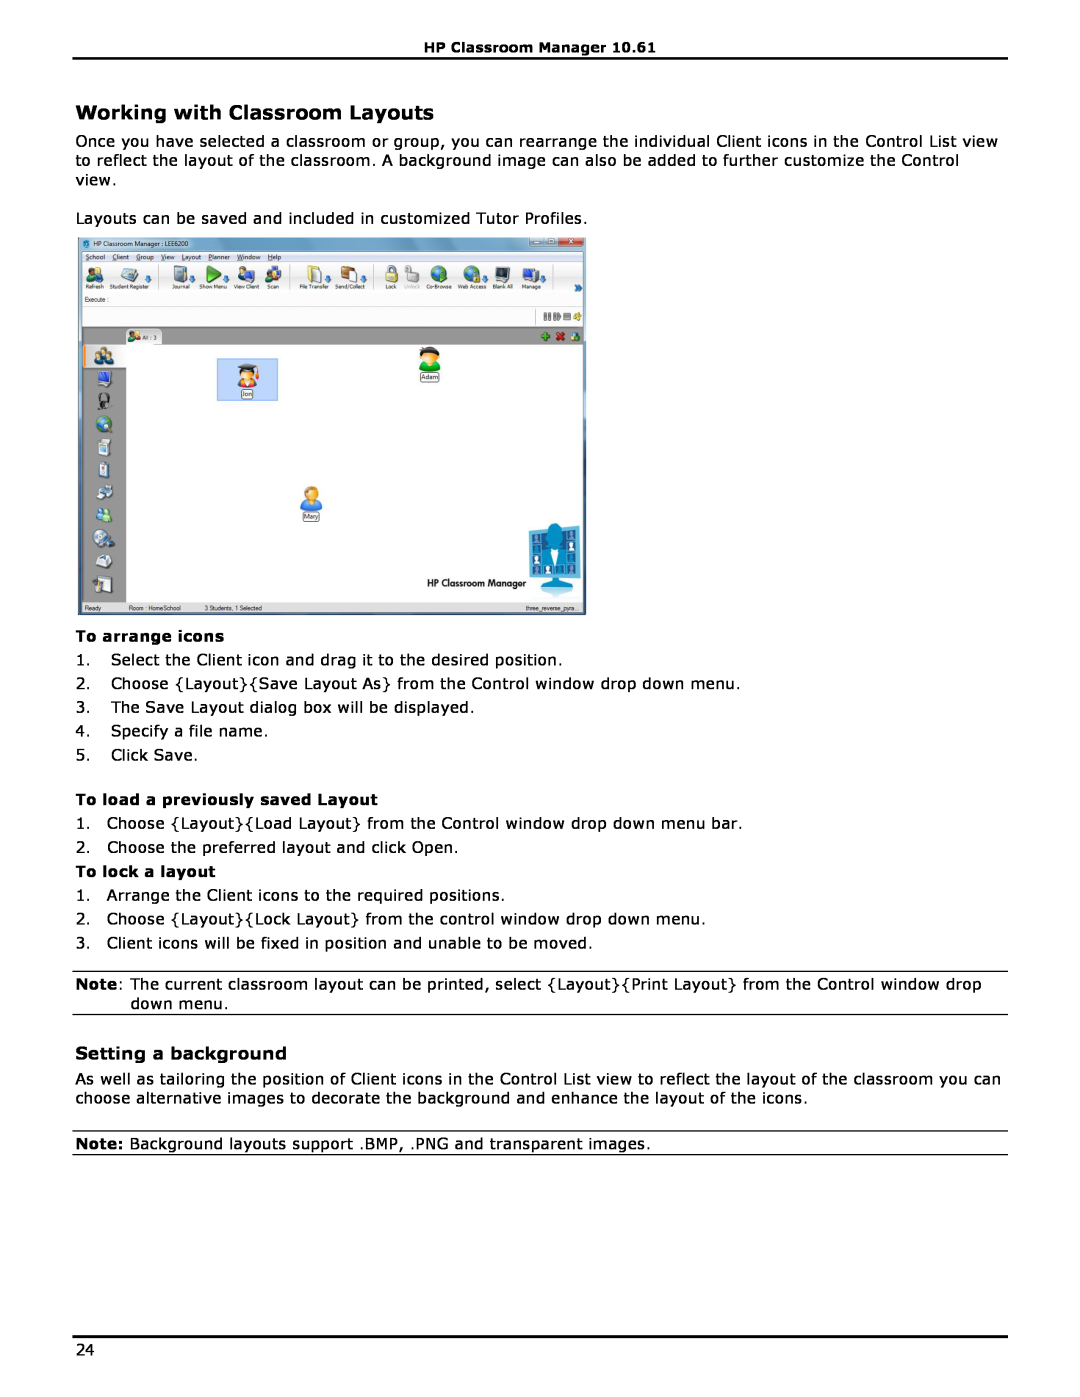 HP Classroom Manager manual Working with Classroom Layouts, Setting a background, To arrange icons, To lock a layout 